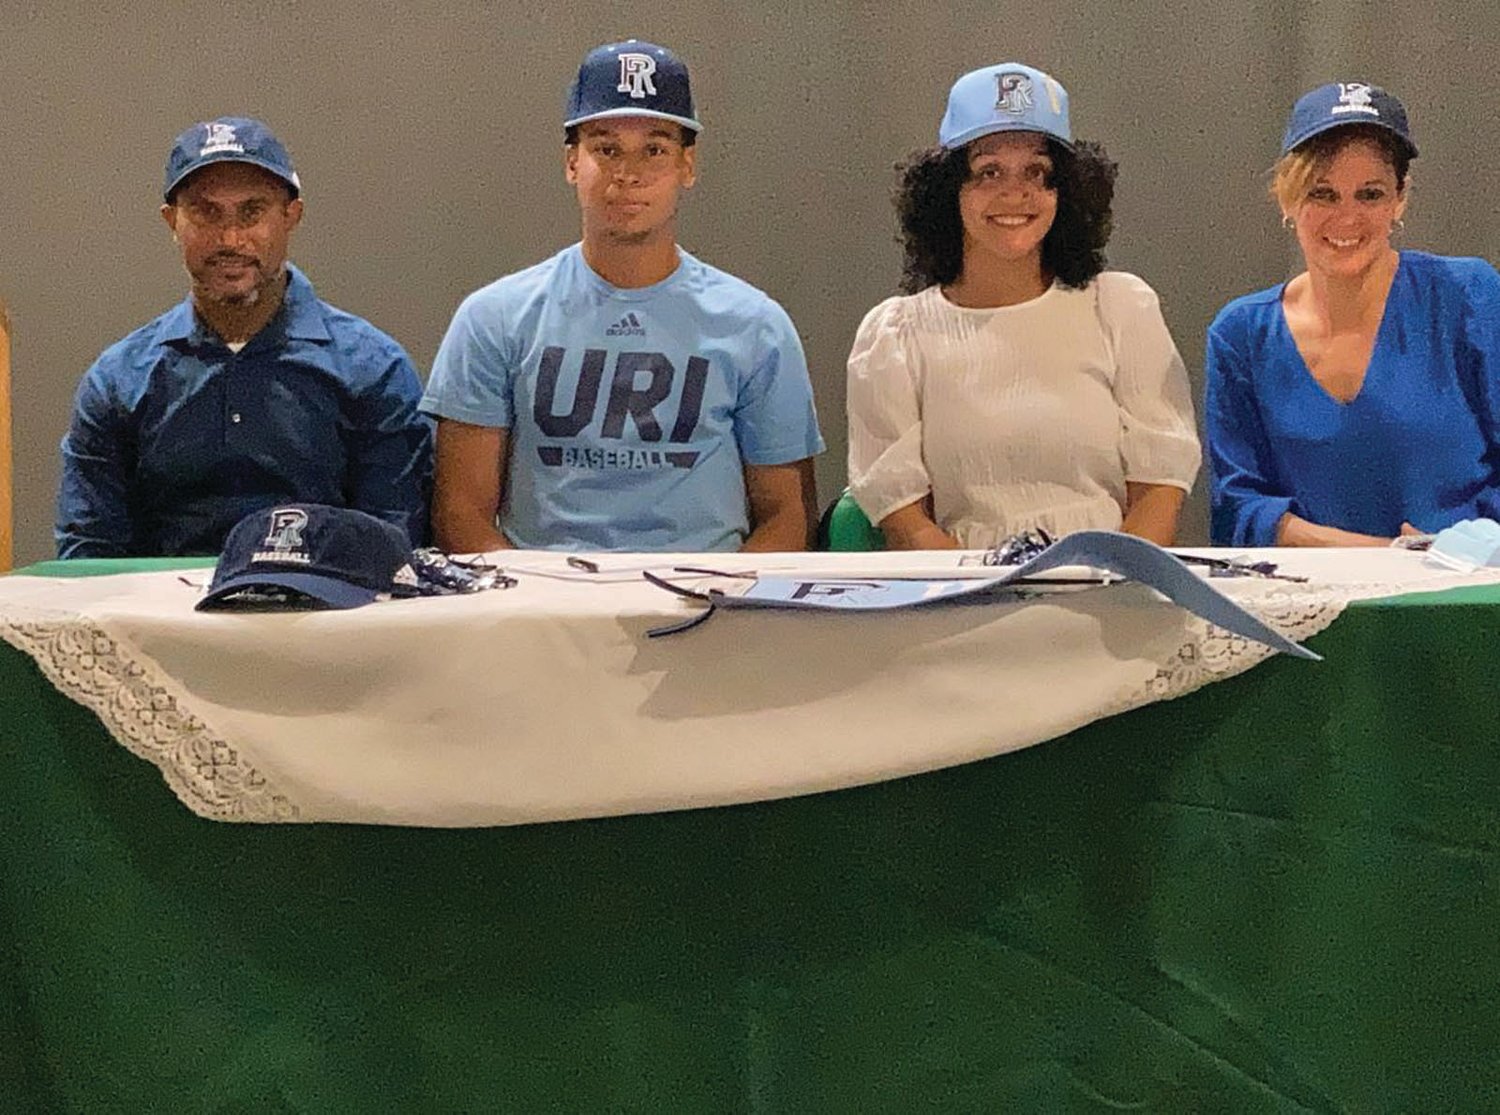 MAKING IT OFFICIAL: Cranston East’s Anthony Fernandez (second from left) signs his National Letter of Intent to
play baseball for Division I University of Rhode Island.